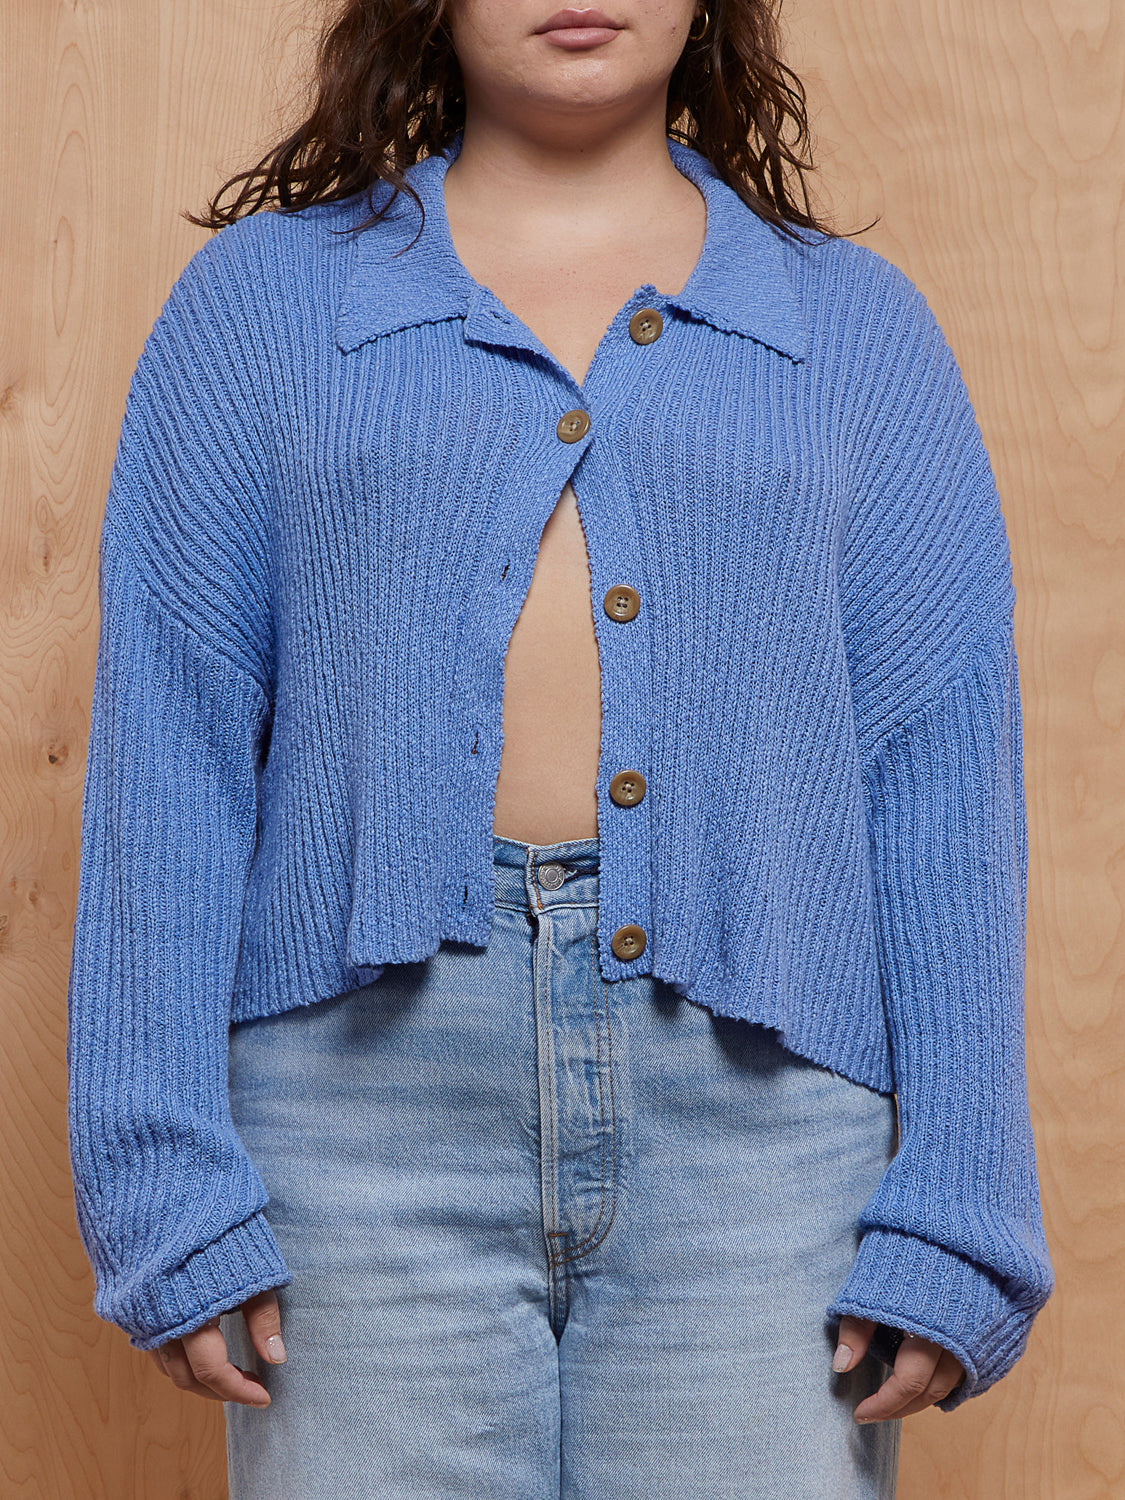 Urban Outfitters Blue Cardigan